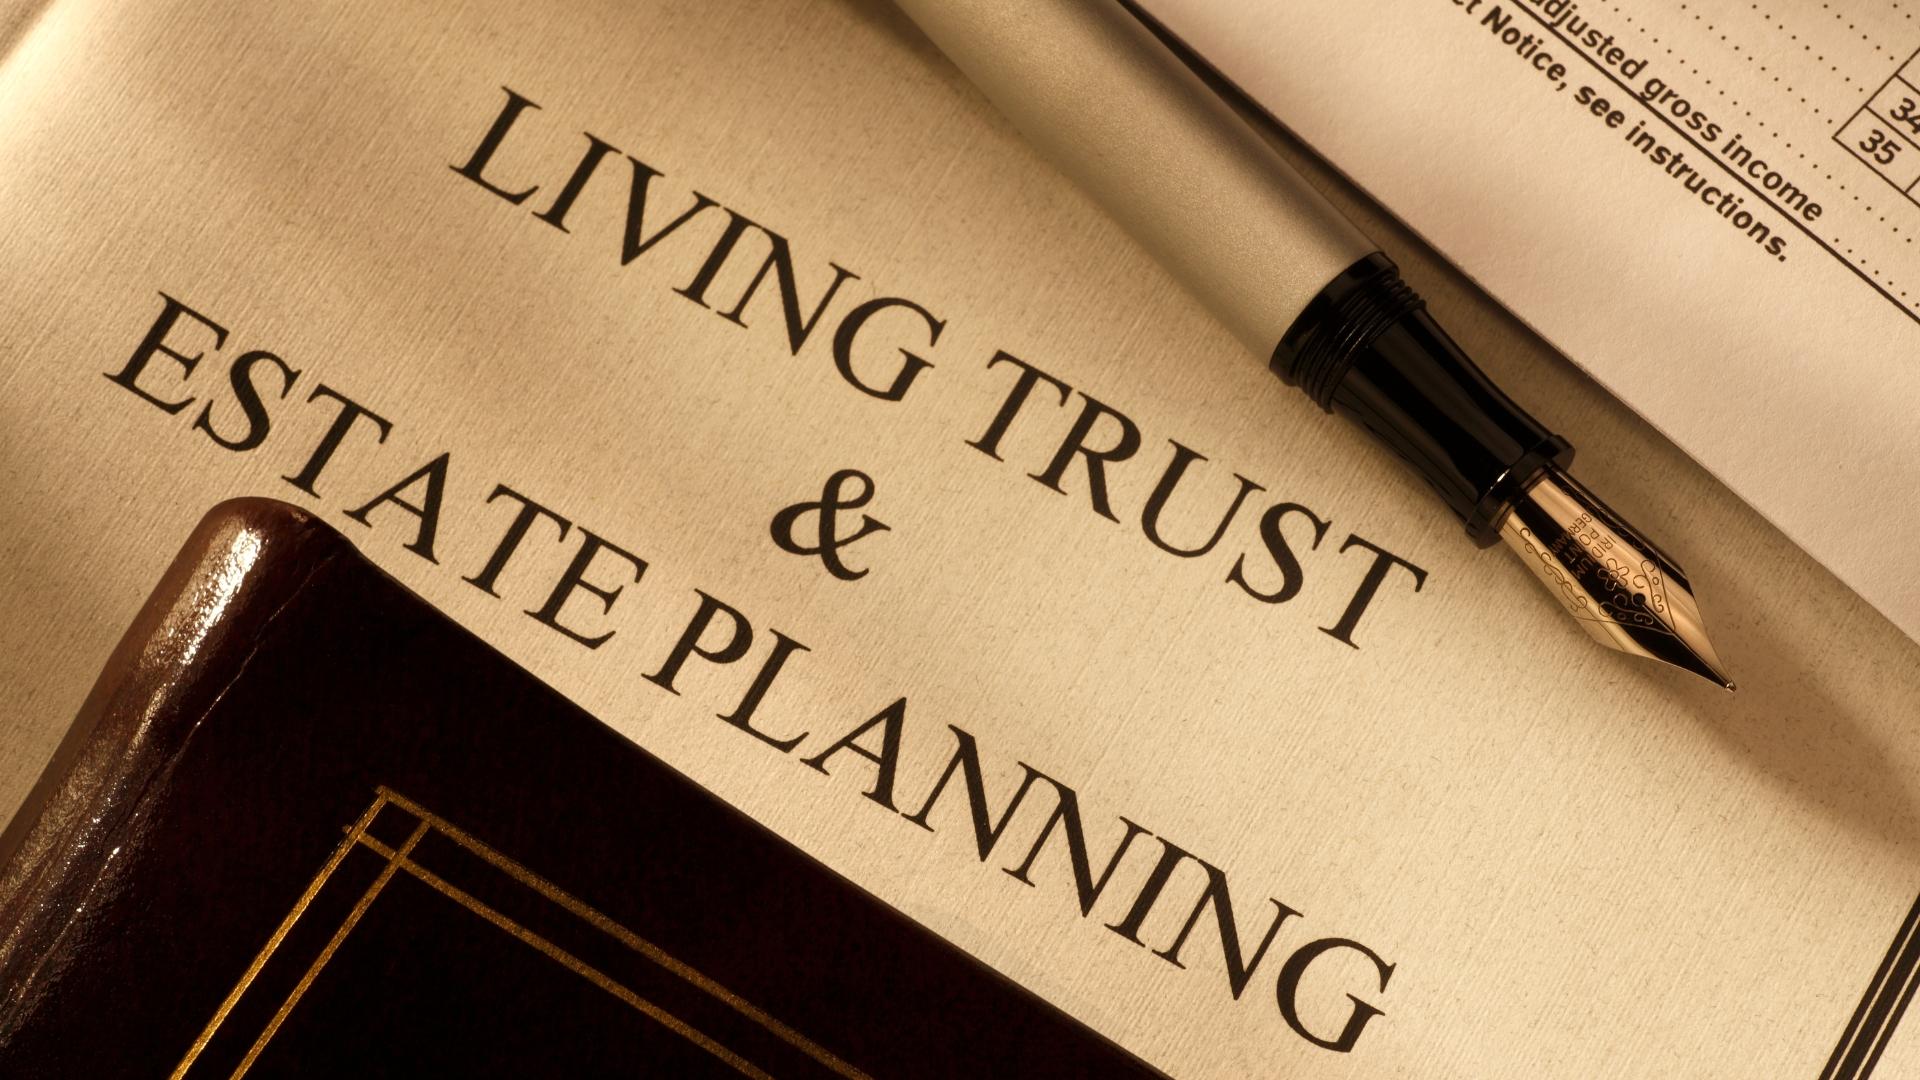 What You Need to Know About Wills Trusts